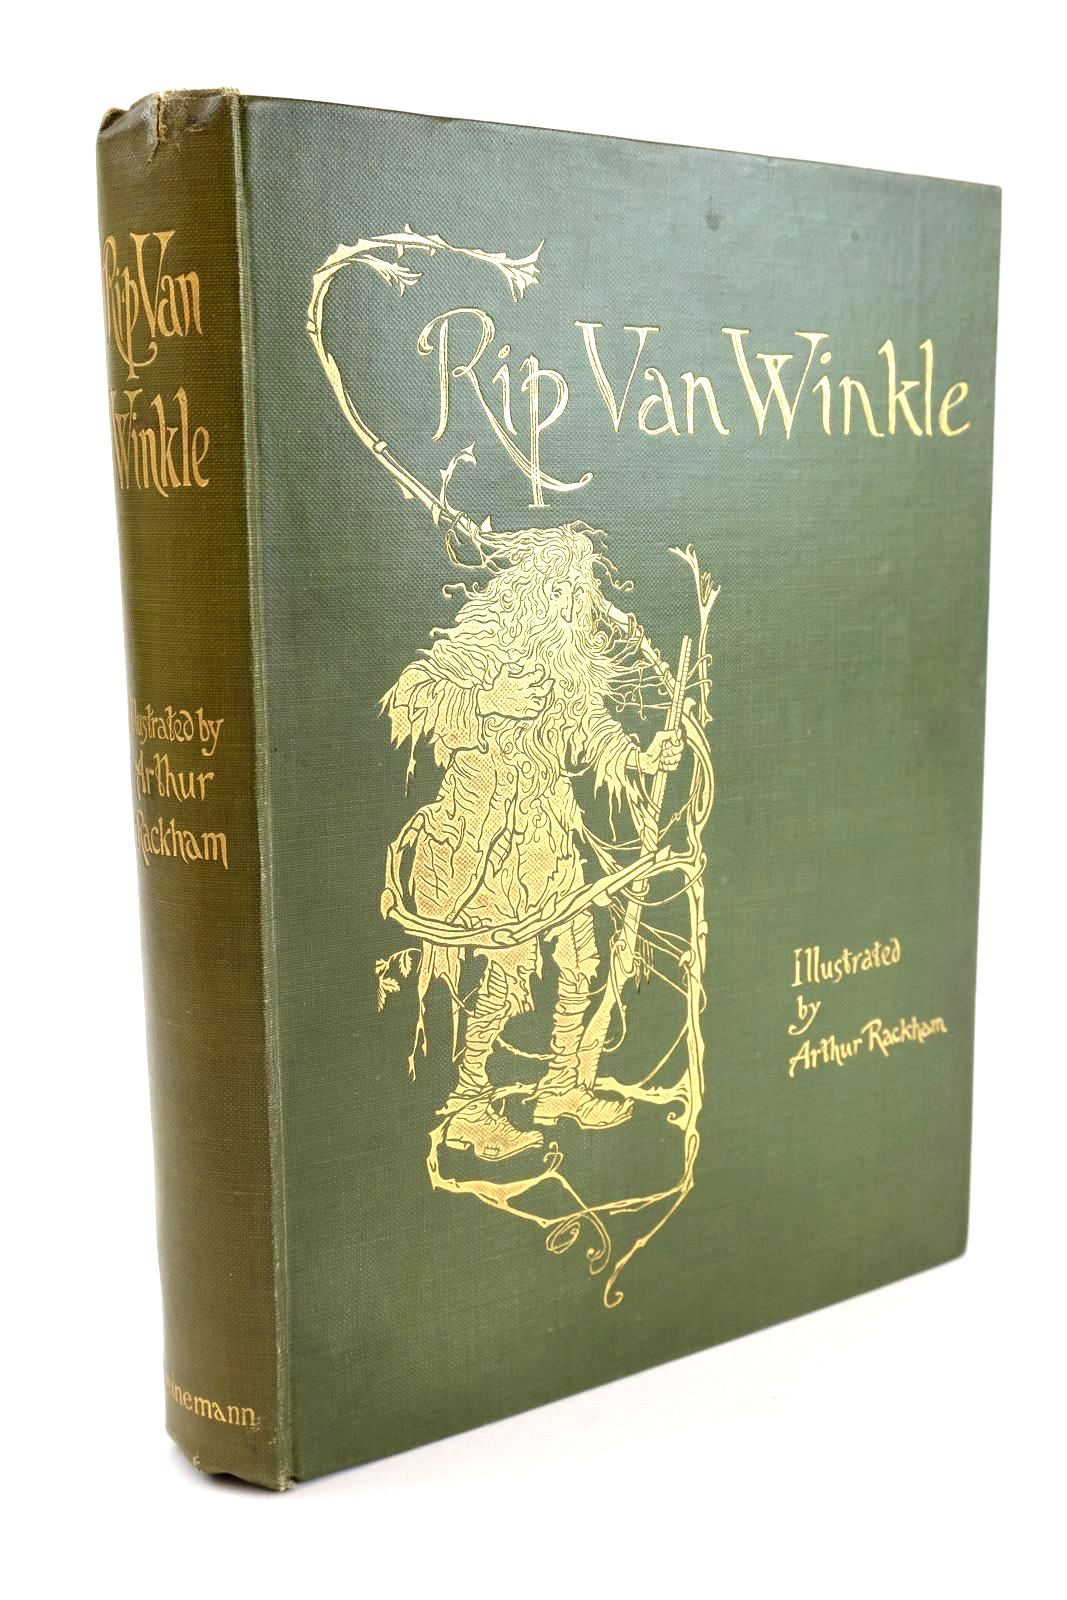 Photo of RIP VAN WINKLE written by Irving, Washington illustrated by Rackham, Arthur published by William Heinemann (STOCK CODE: 1325068)  for sale by Stella & Rose's Books